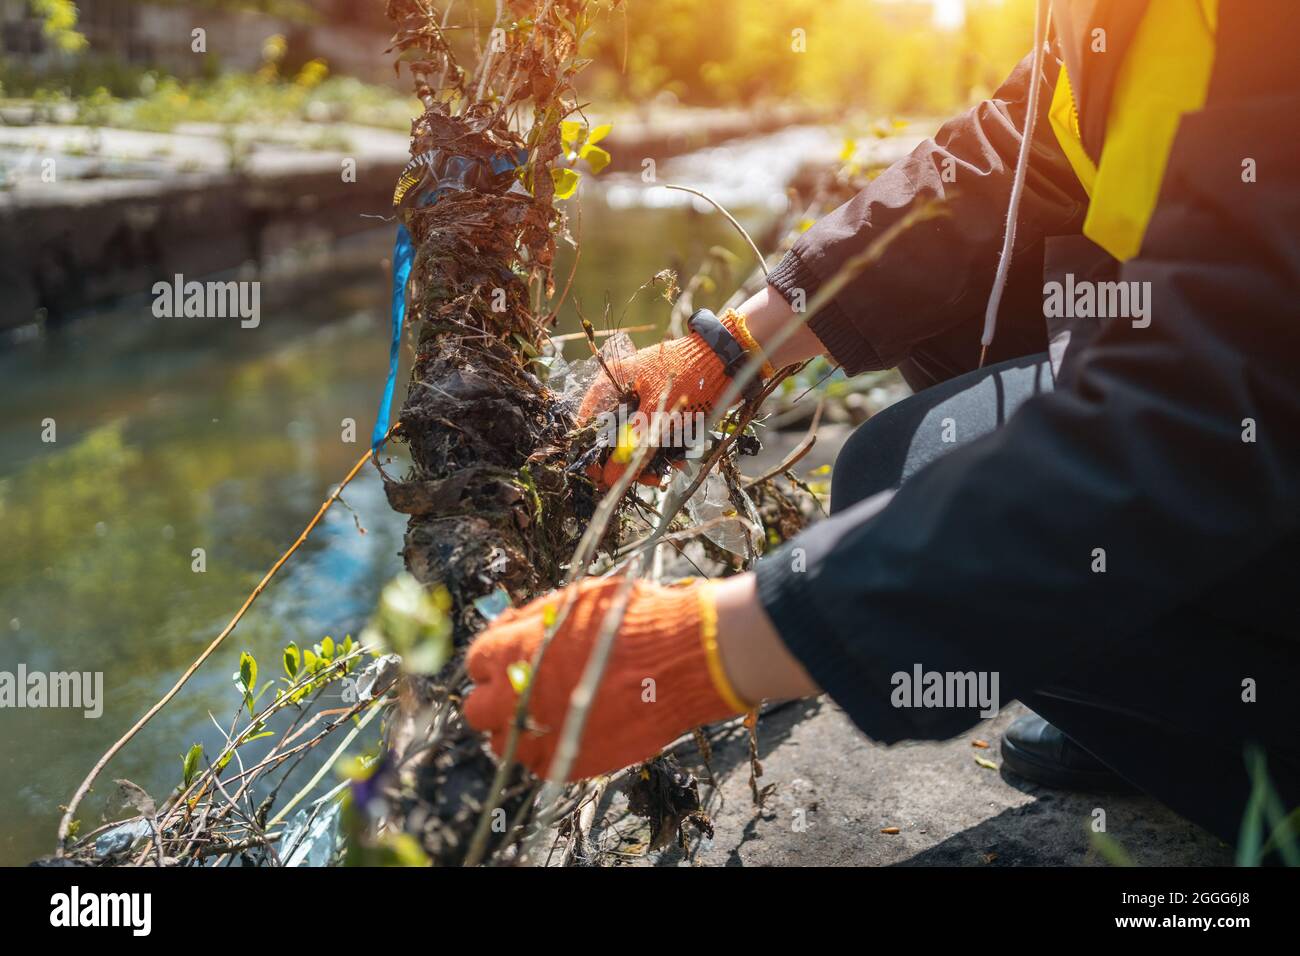 A Black Plastic Garbage Bag Being Lifted And Displaced By A Powerful Green  Tree Sapling Stock Photo, Picture and Royalty Free Image. Image 25113334.